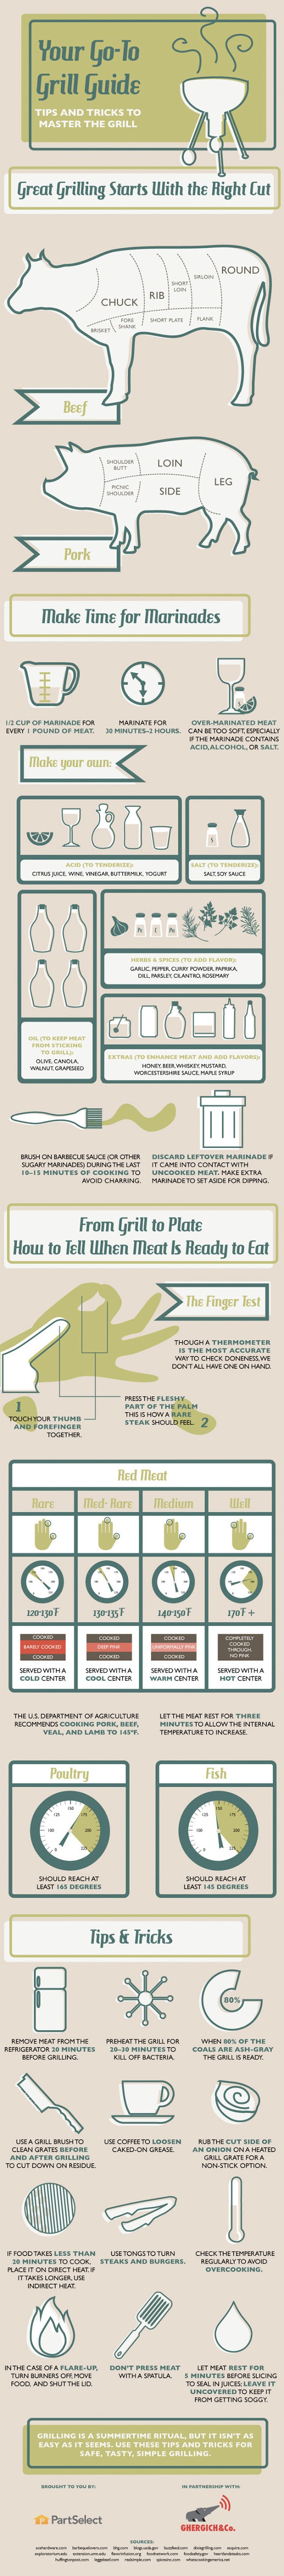 Infographic: Your Go-to Grill Guide